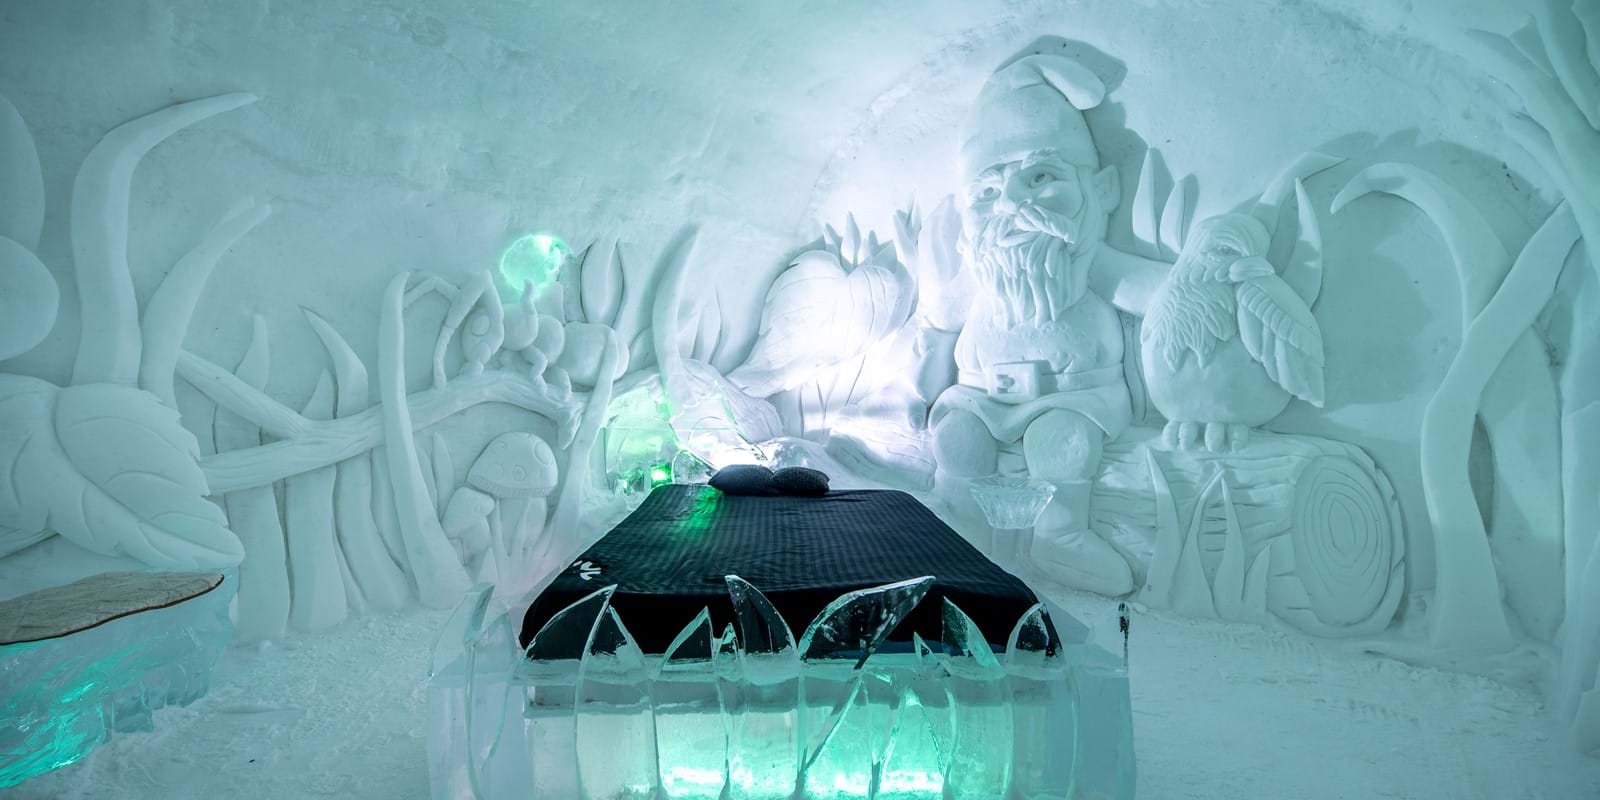 ice hotel quebec most unusual tourist attractions canada